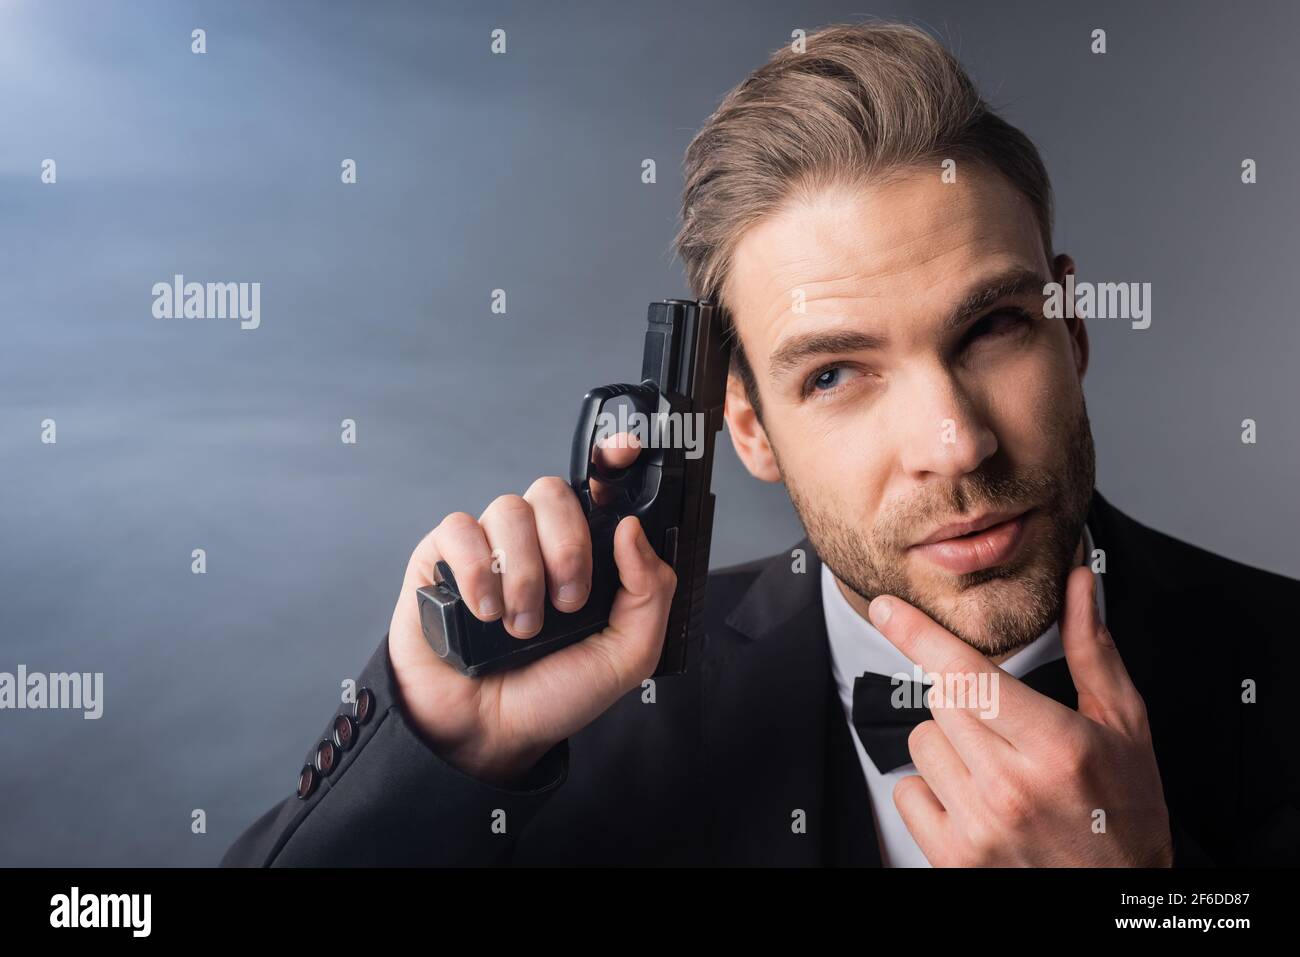 thoughtful businessman touching face while holding gun near head on grey background with smoke Stock Photo